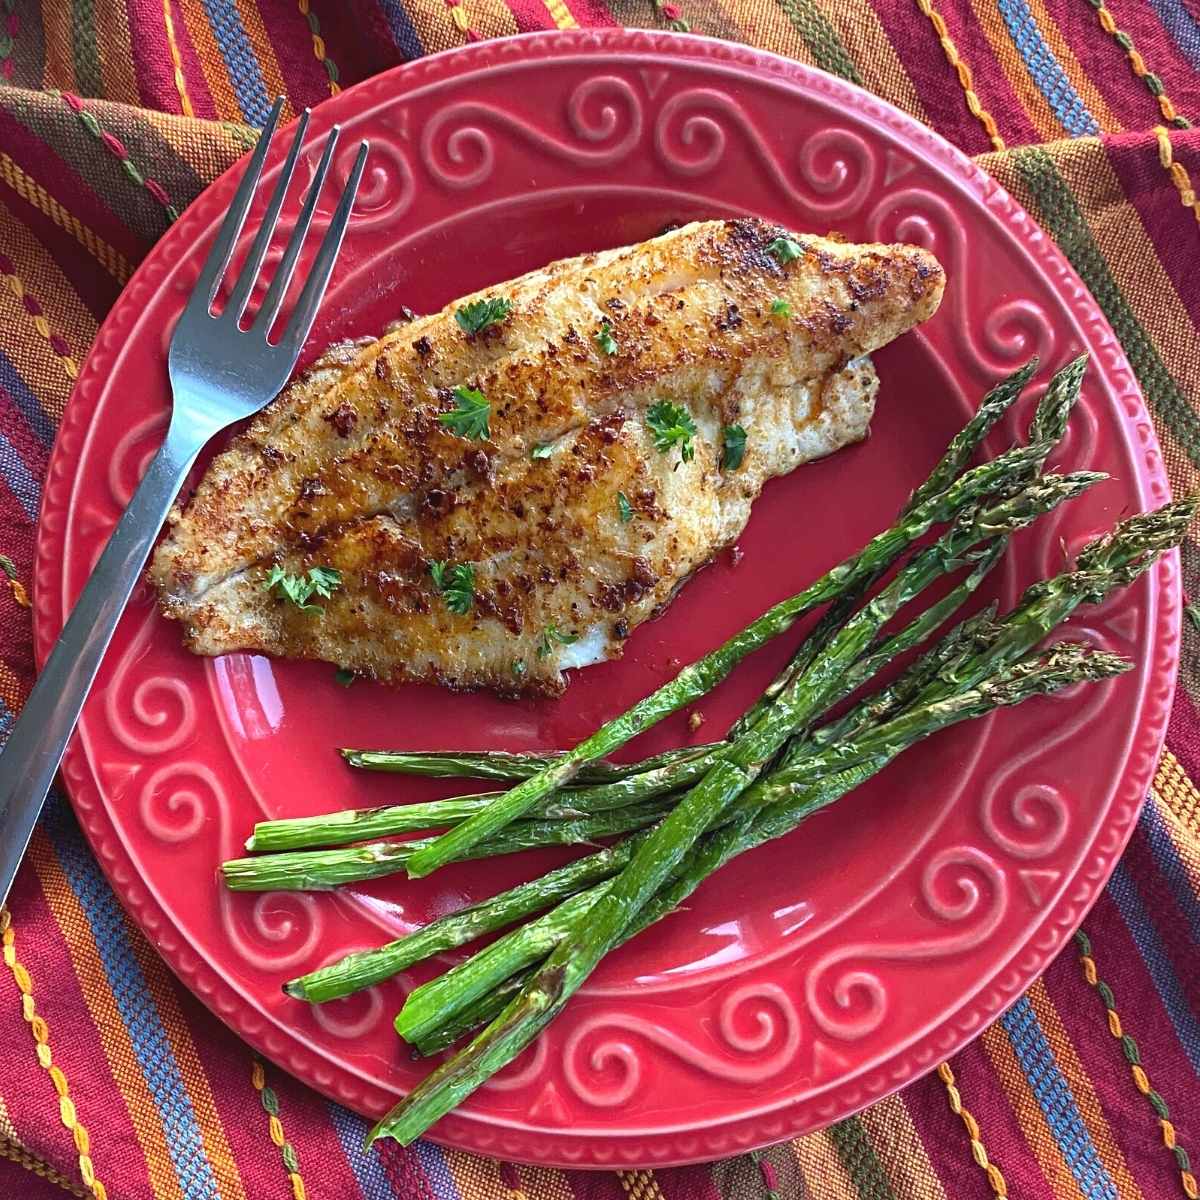 Blackened Cajun Catfish fillet on a plate with roasted asparagus.